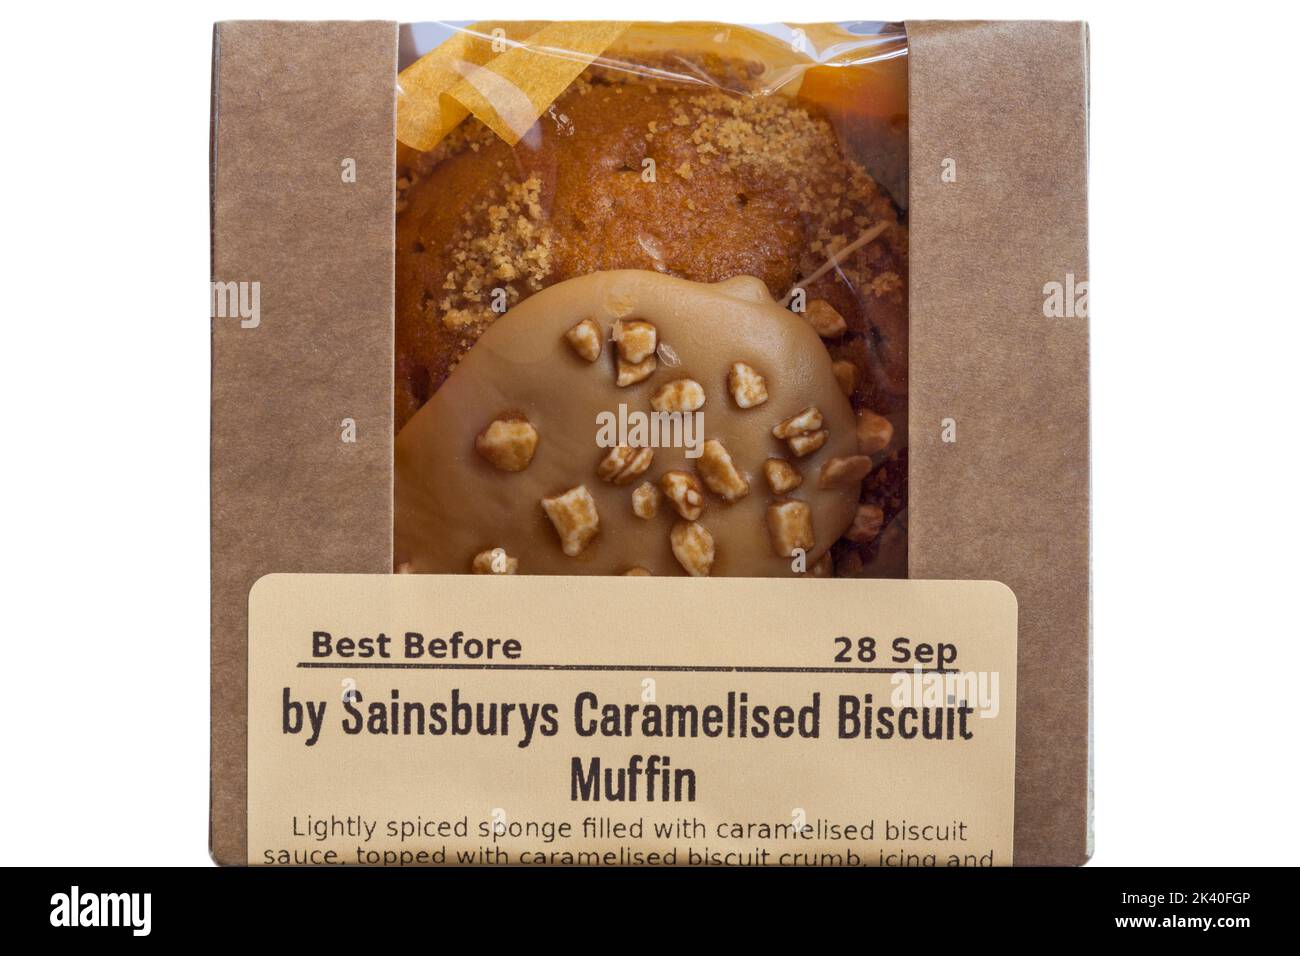 Caramelised Biscuit Muffin by Sainsbury's from Sainsbury's in-store bakery in box set on white background Stock Photo